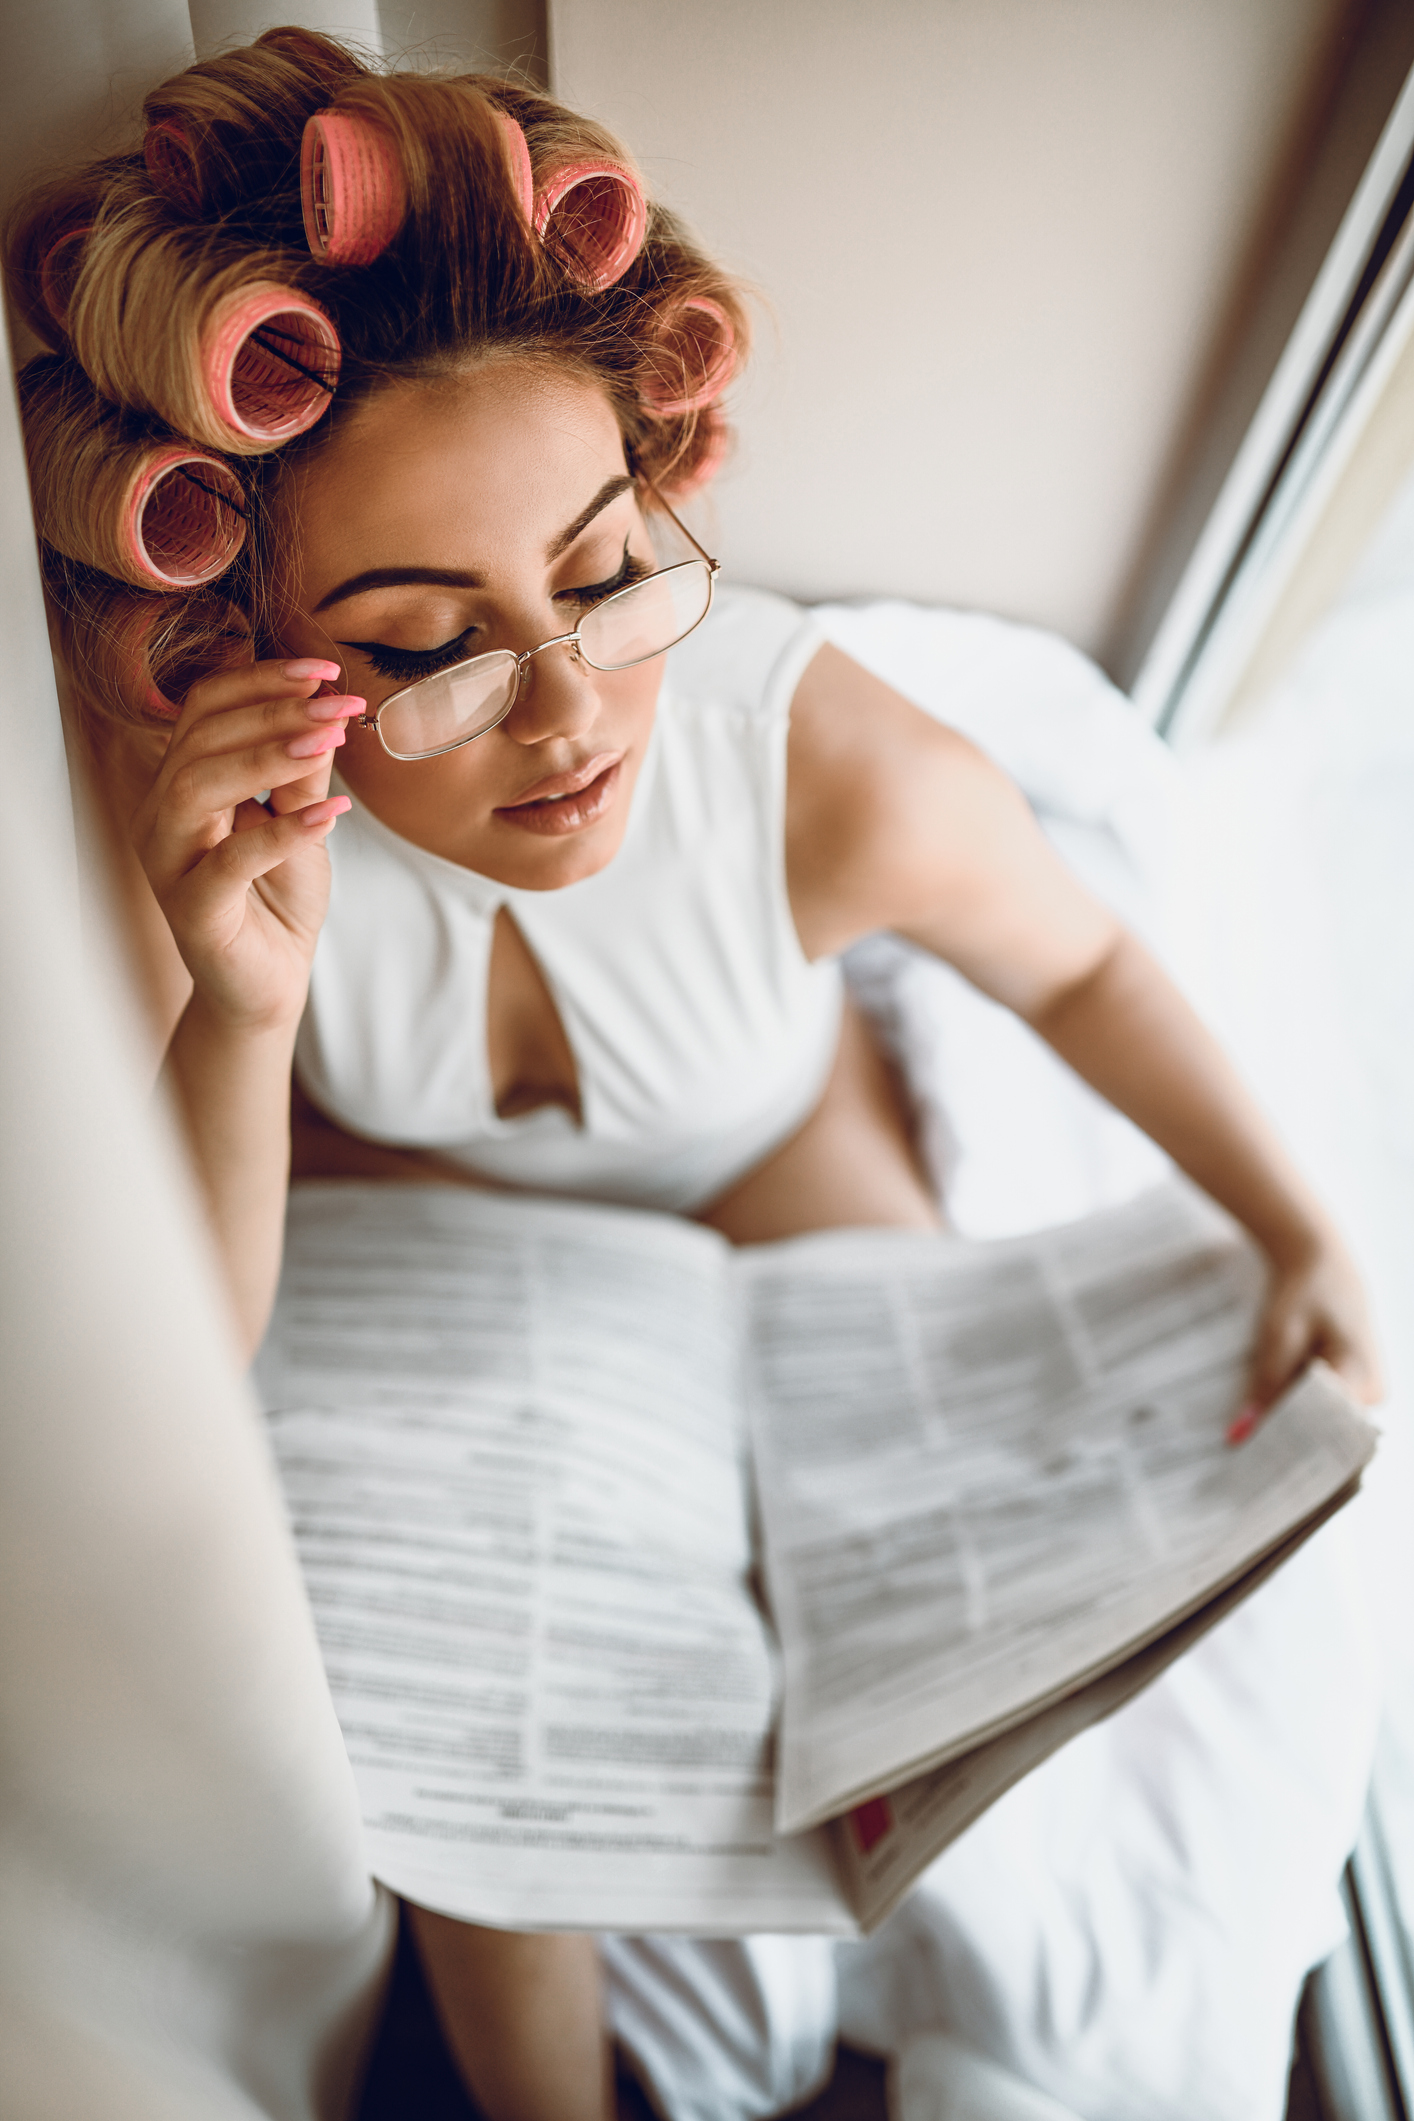 Reading Newspaper Is Morning Routine For Pin Up Girl